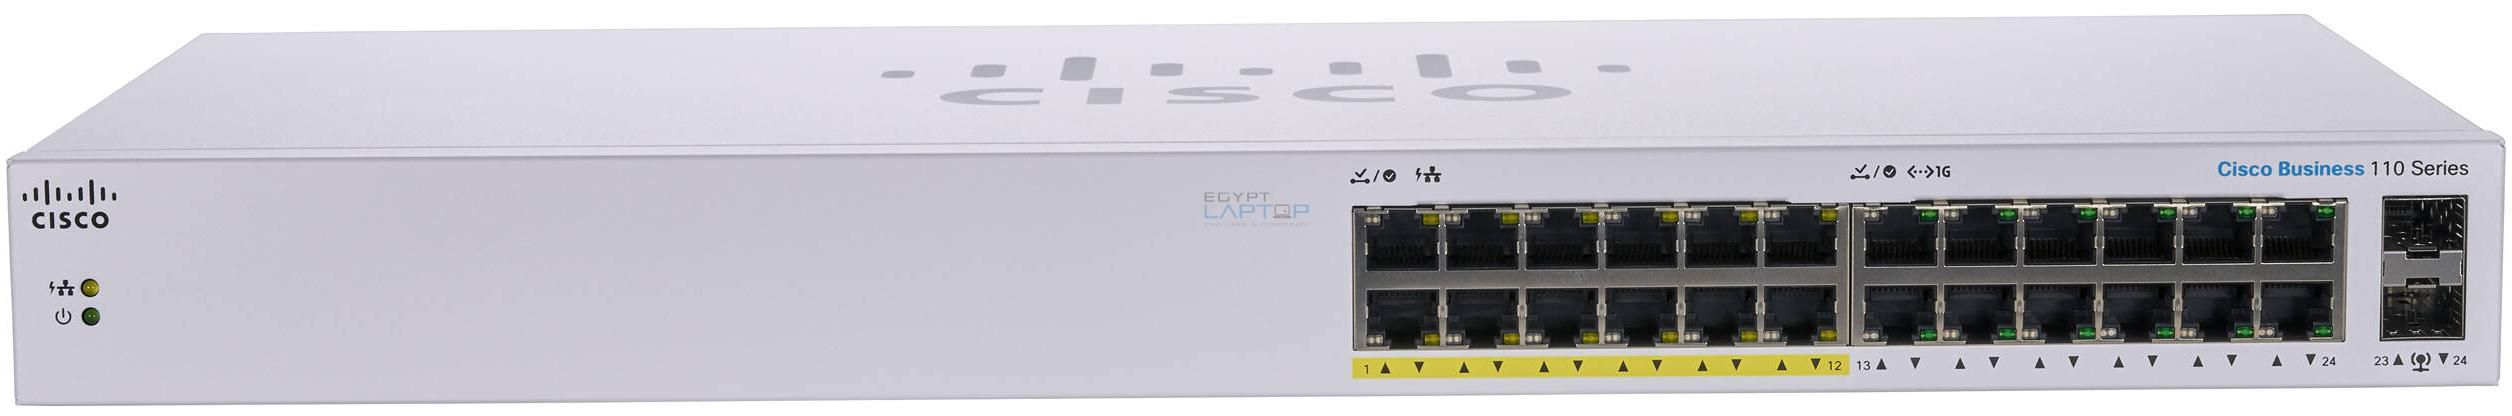 Cisco CBS110-24PP 24 Port 10/100/1000 ports 12 support PoE, with 100W power budged 2 Gigabit SFP Unmanaged Switch